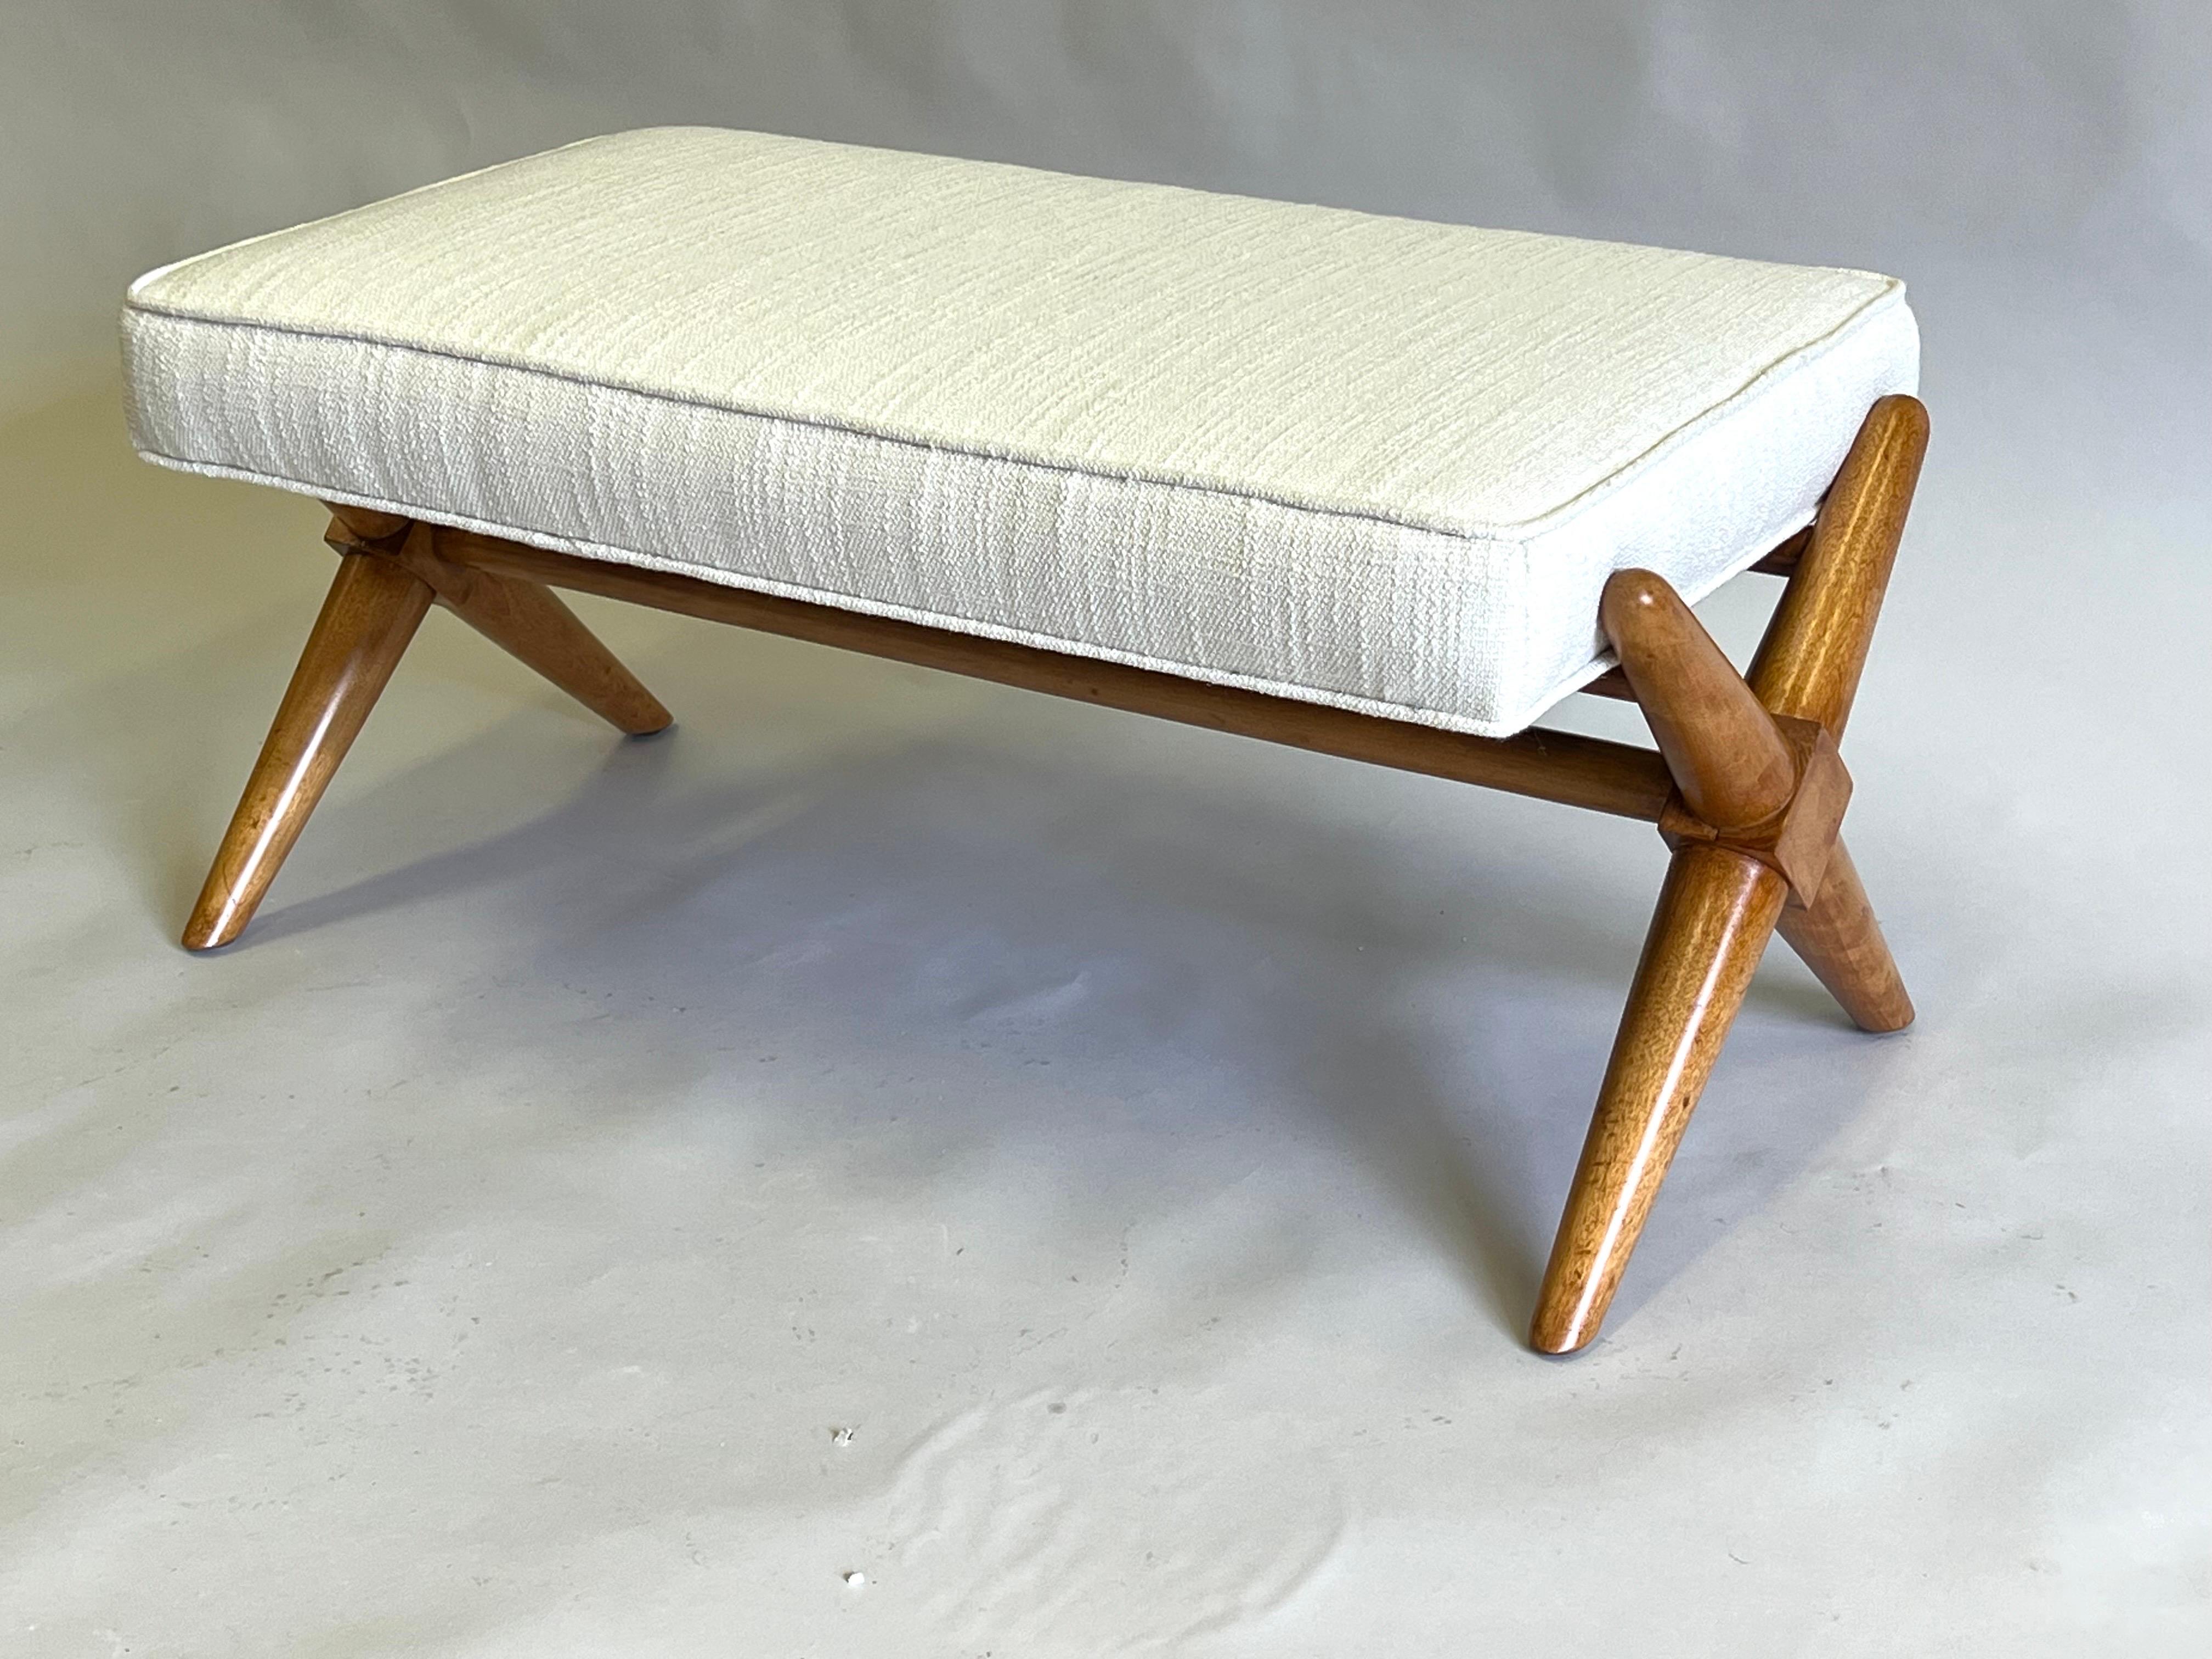 French Mid-Century Modern Neoclassical Hardwood Bench in the style of Jean-Michel Frank For Sale